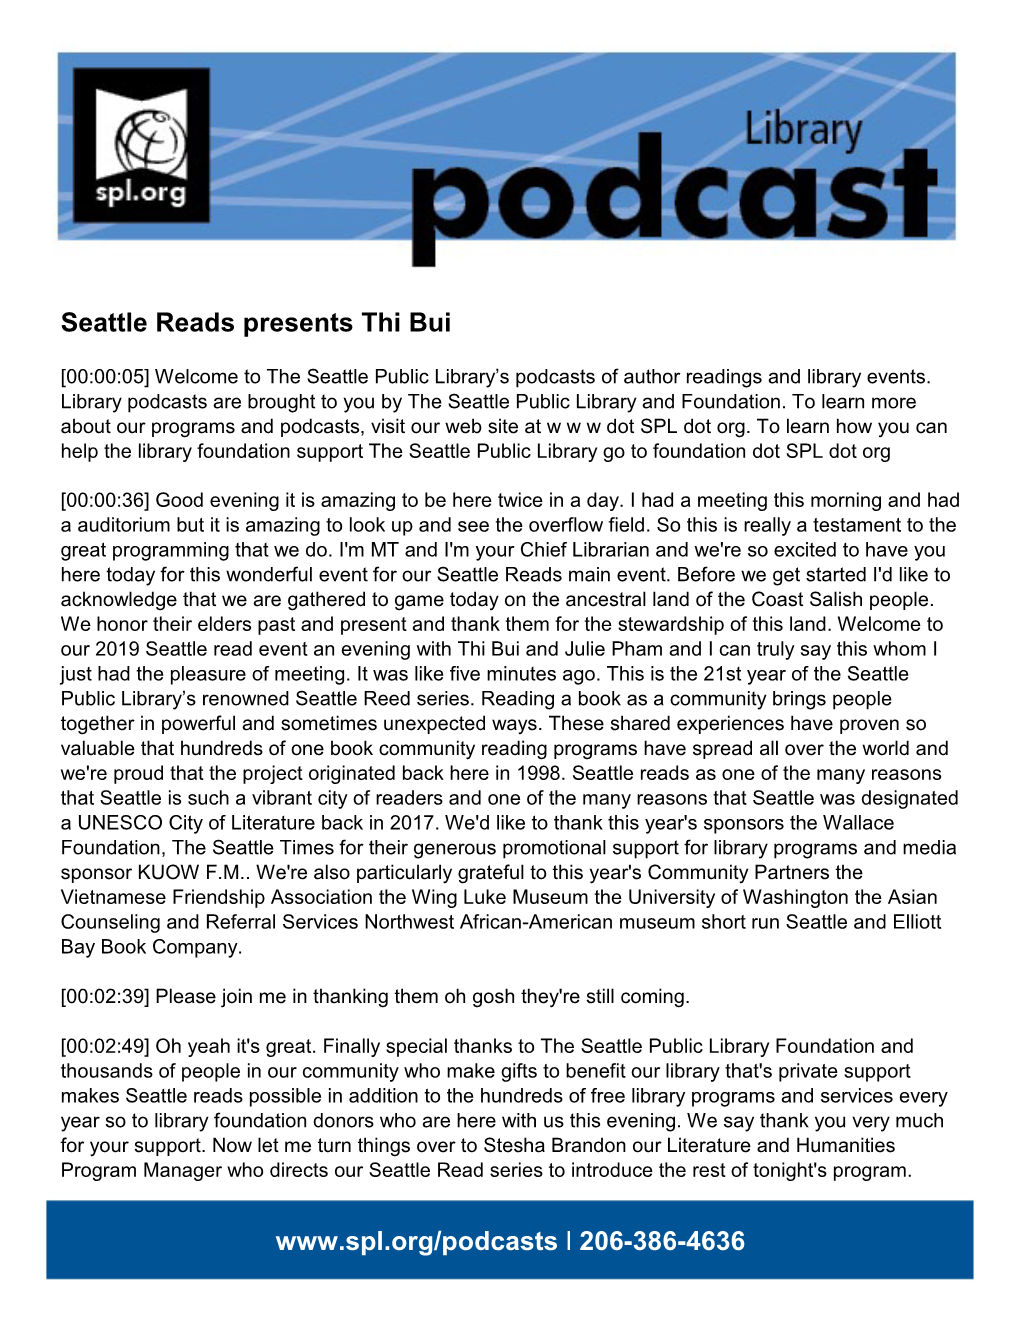 Seattle Reads Presents Thi Bui